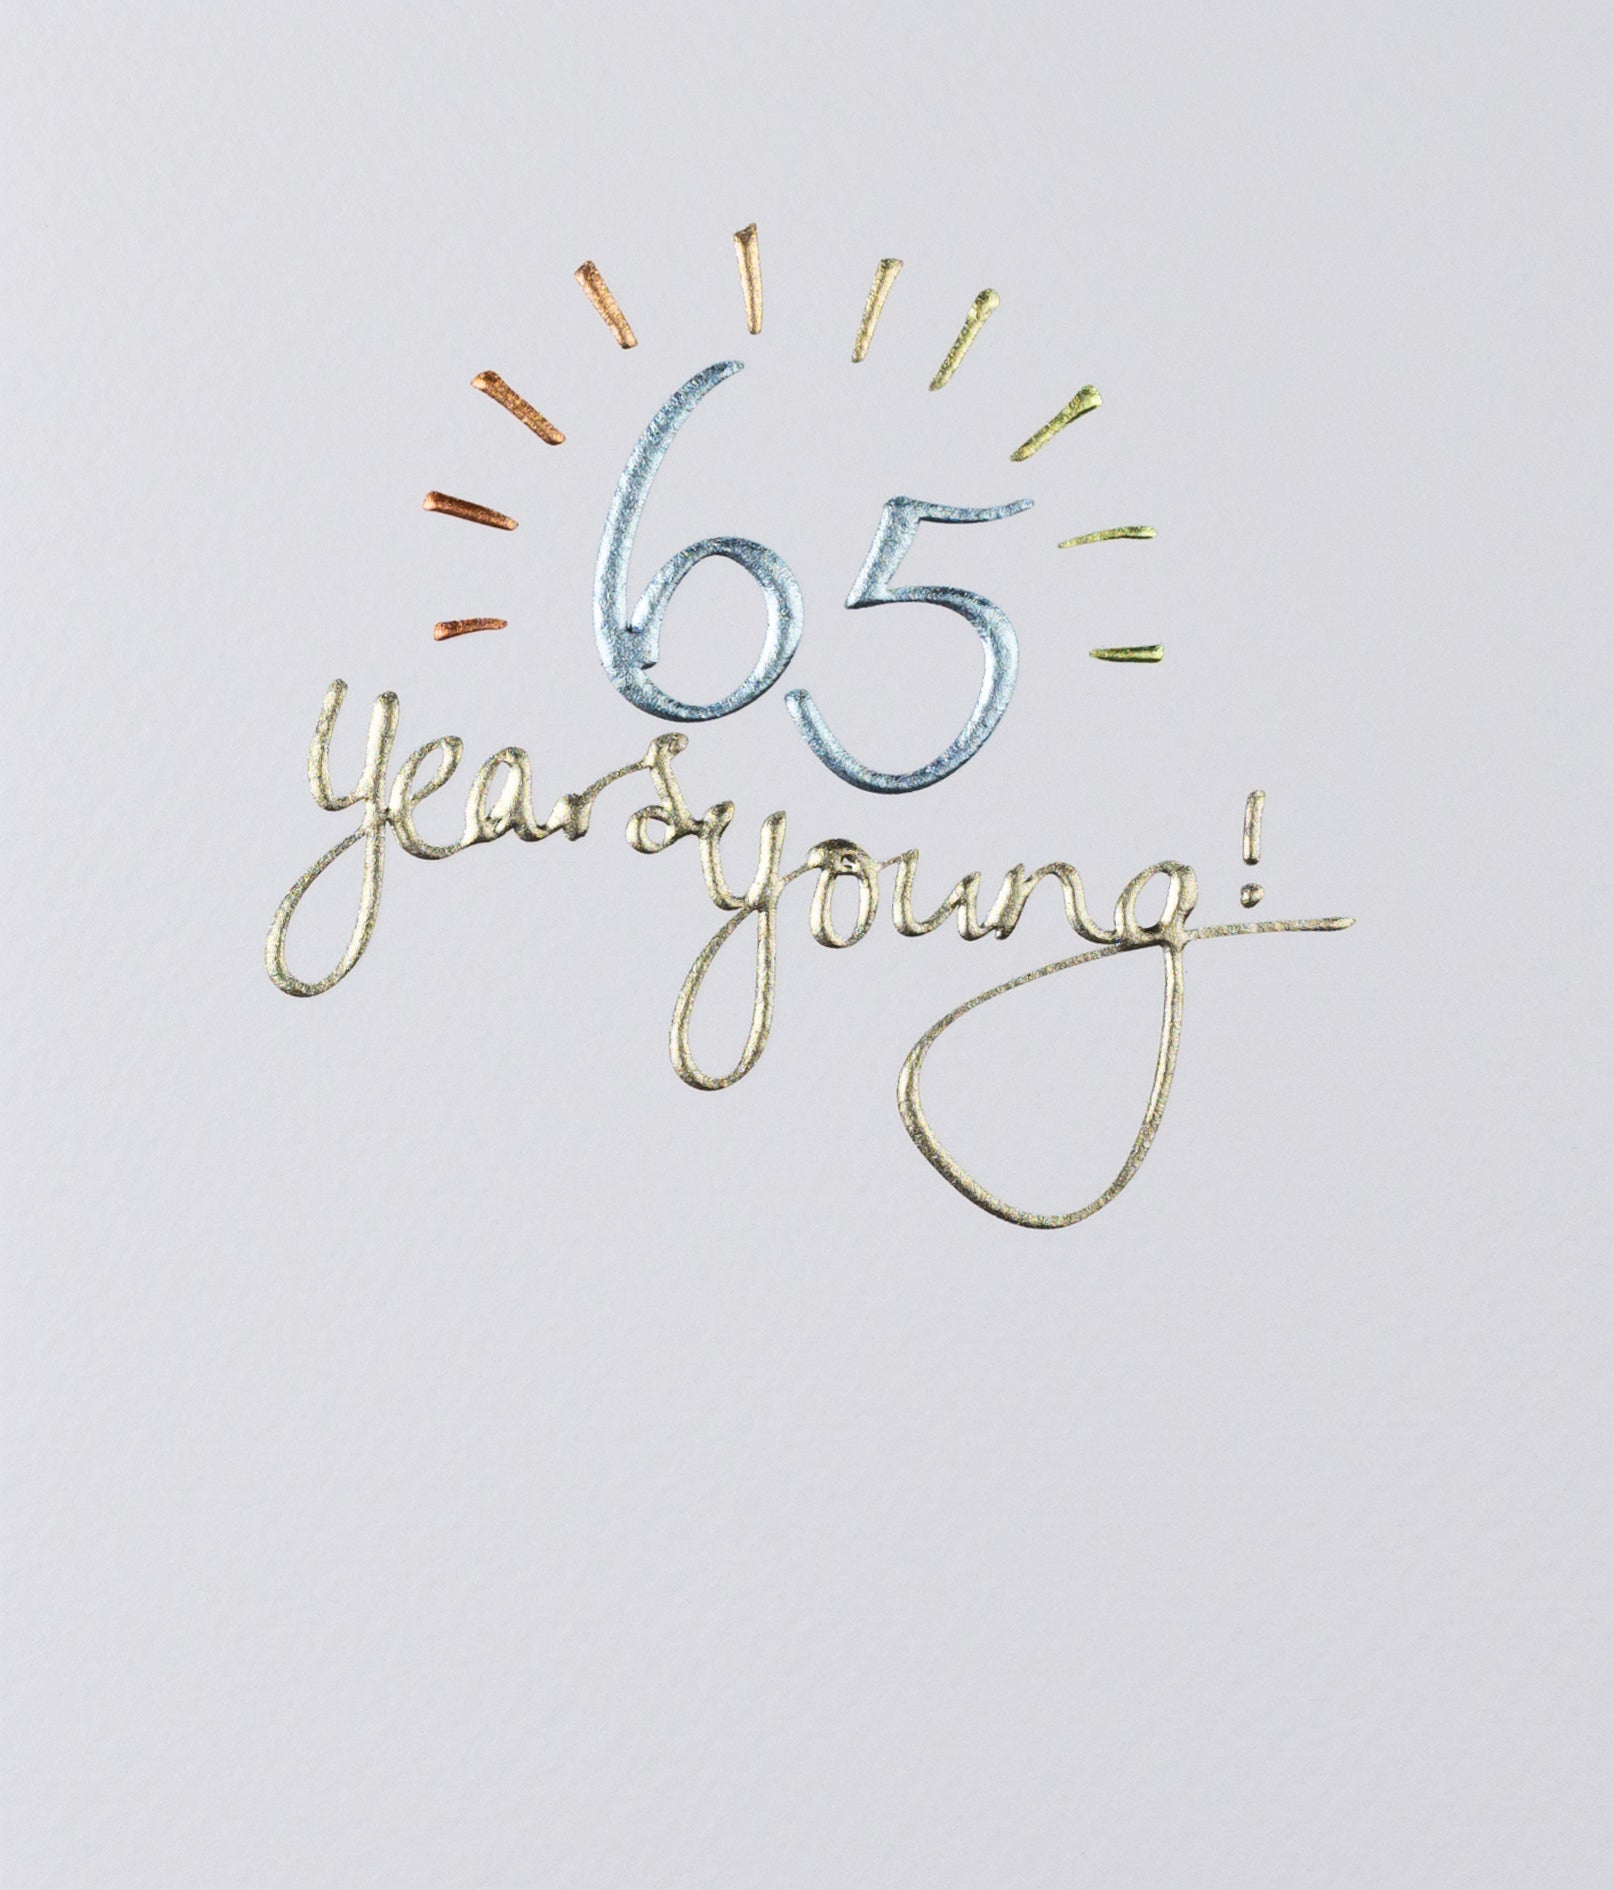 65 Years Young Birthday Card from Penny Black